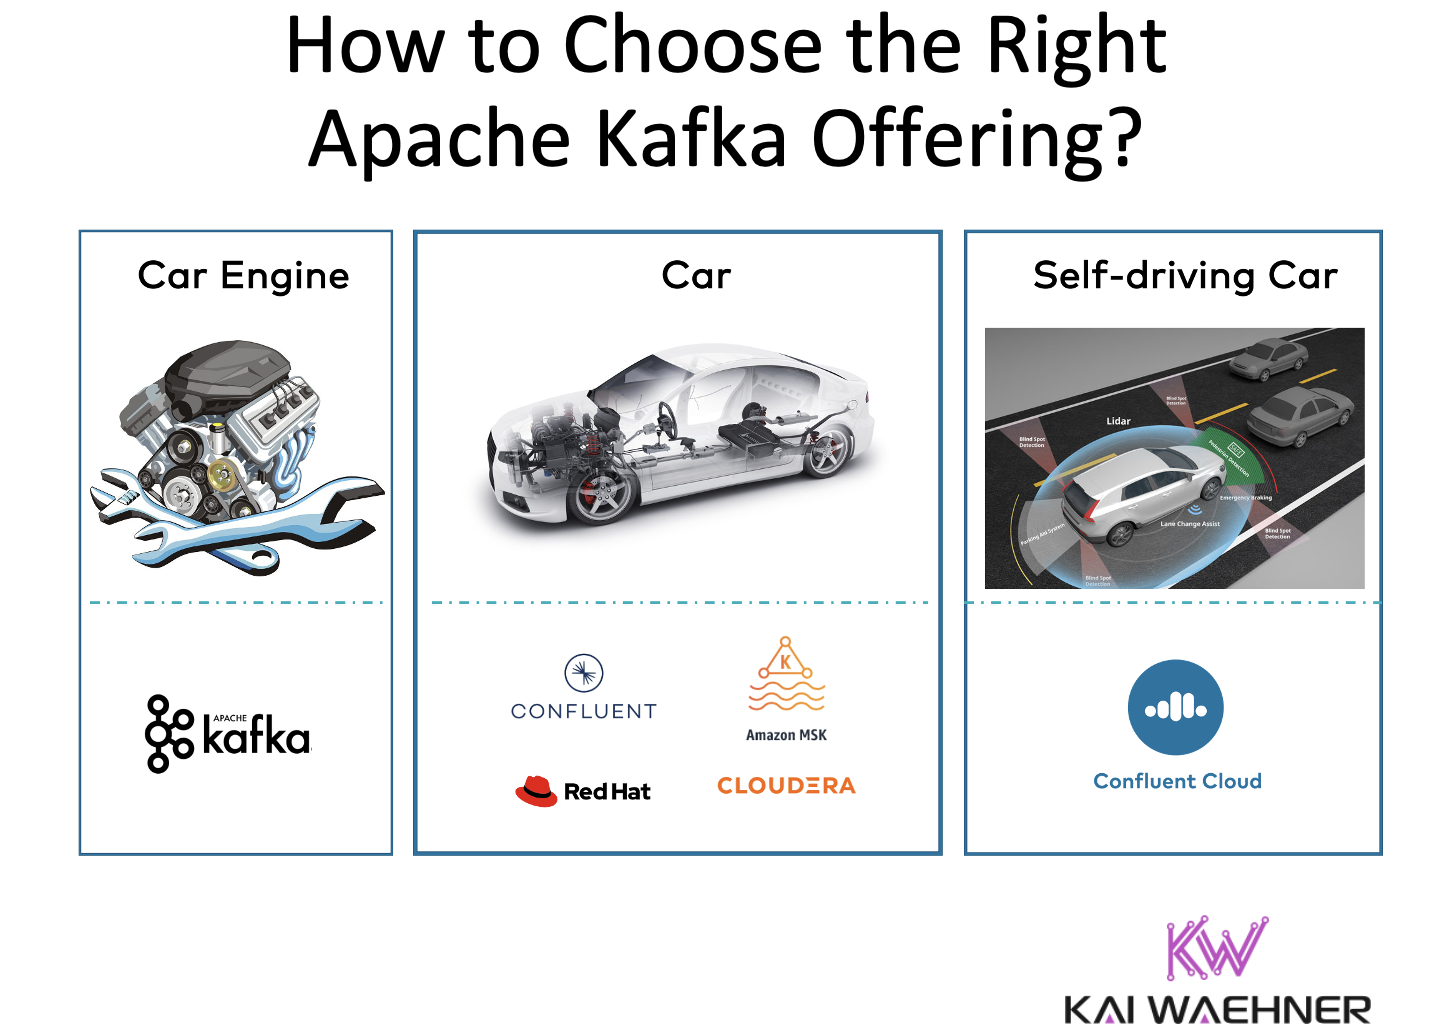 How to choose the right Apache Kafka Offering - Confluent Cloudera Red Hat IBM Amazon AWS MSK